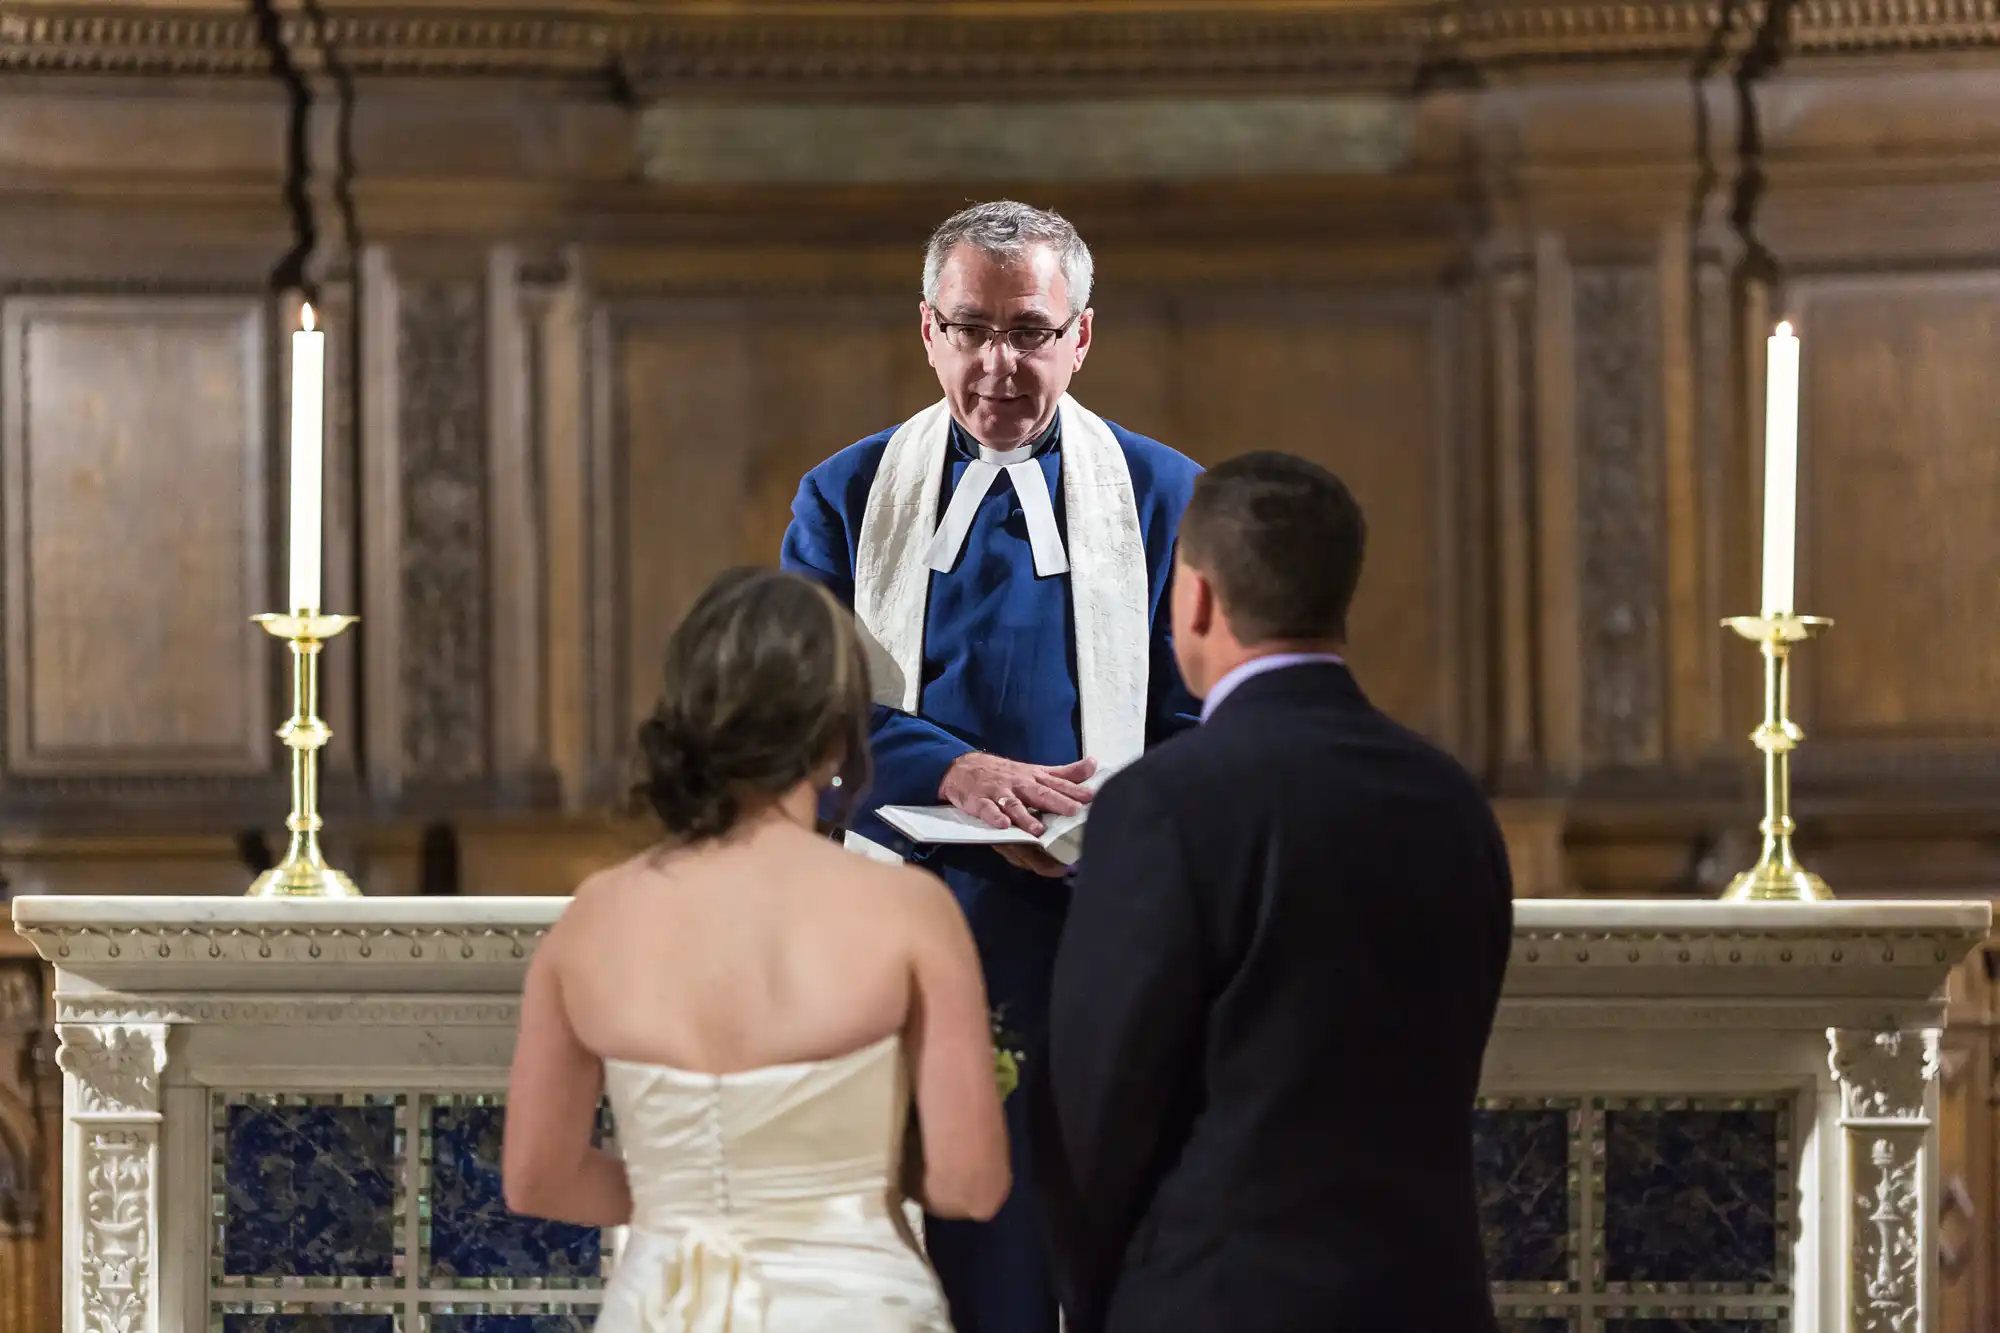 A minister officiates a wedding ceremony for a couple in a church, standing behind an altar with candles.